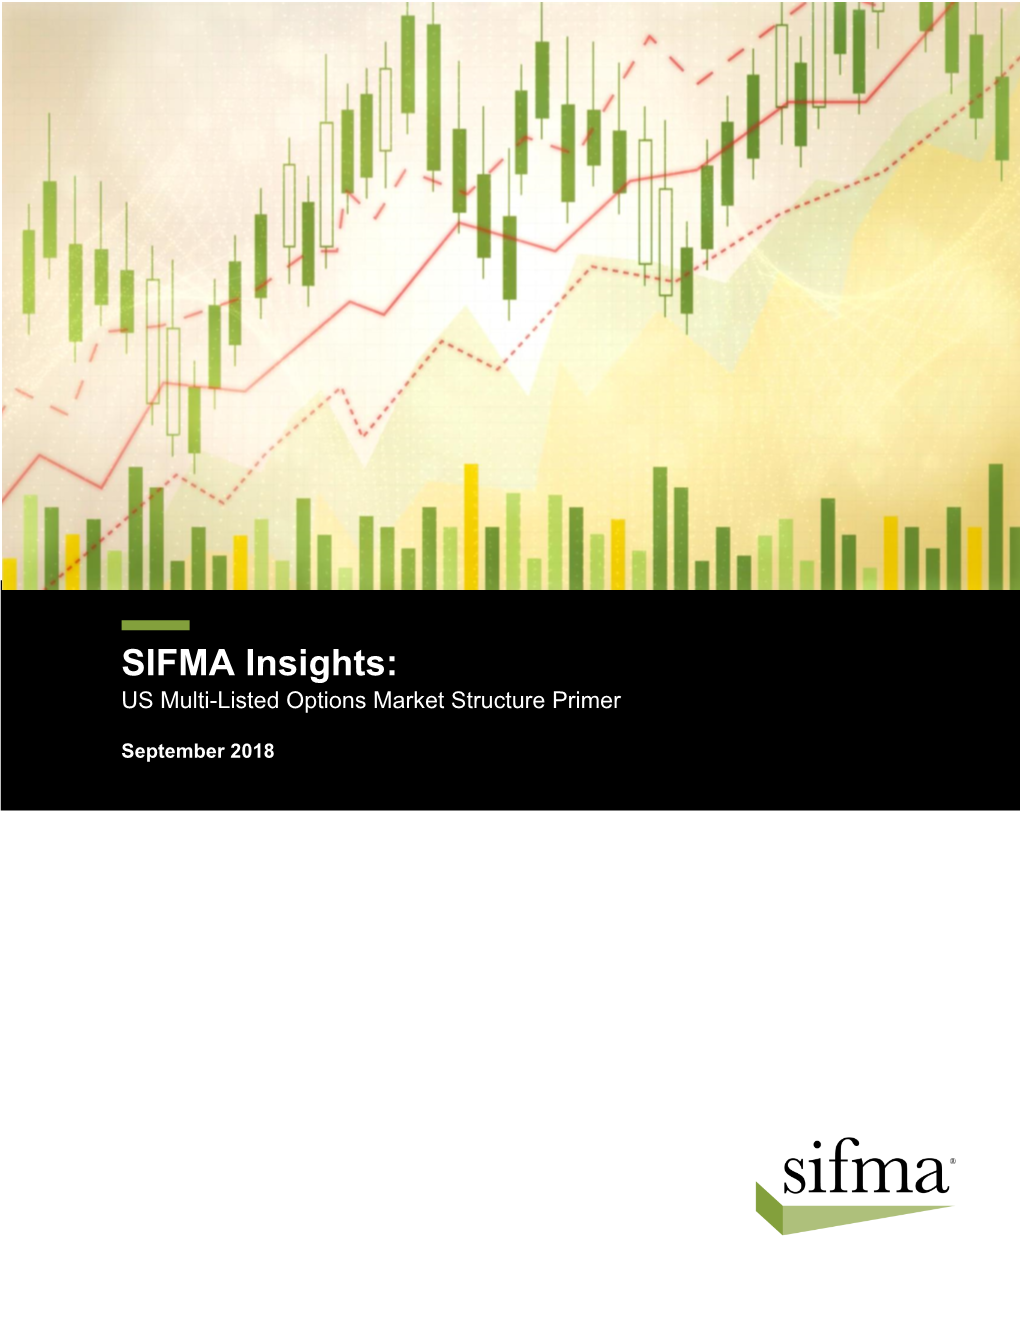 SIFMA Insights: US Multi-Listed Options Market Structure Primer